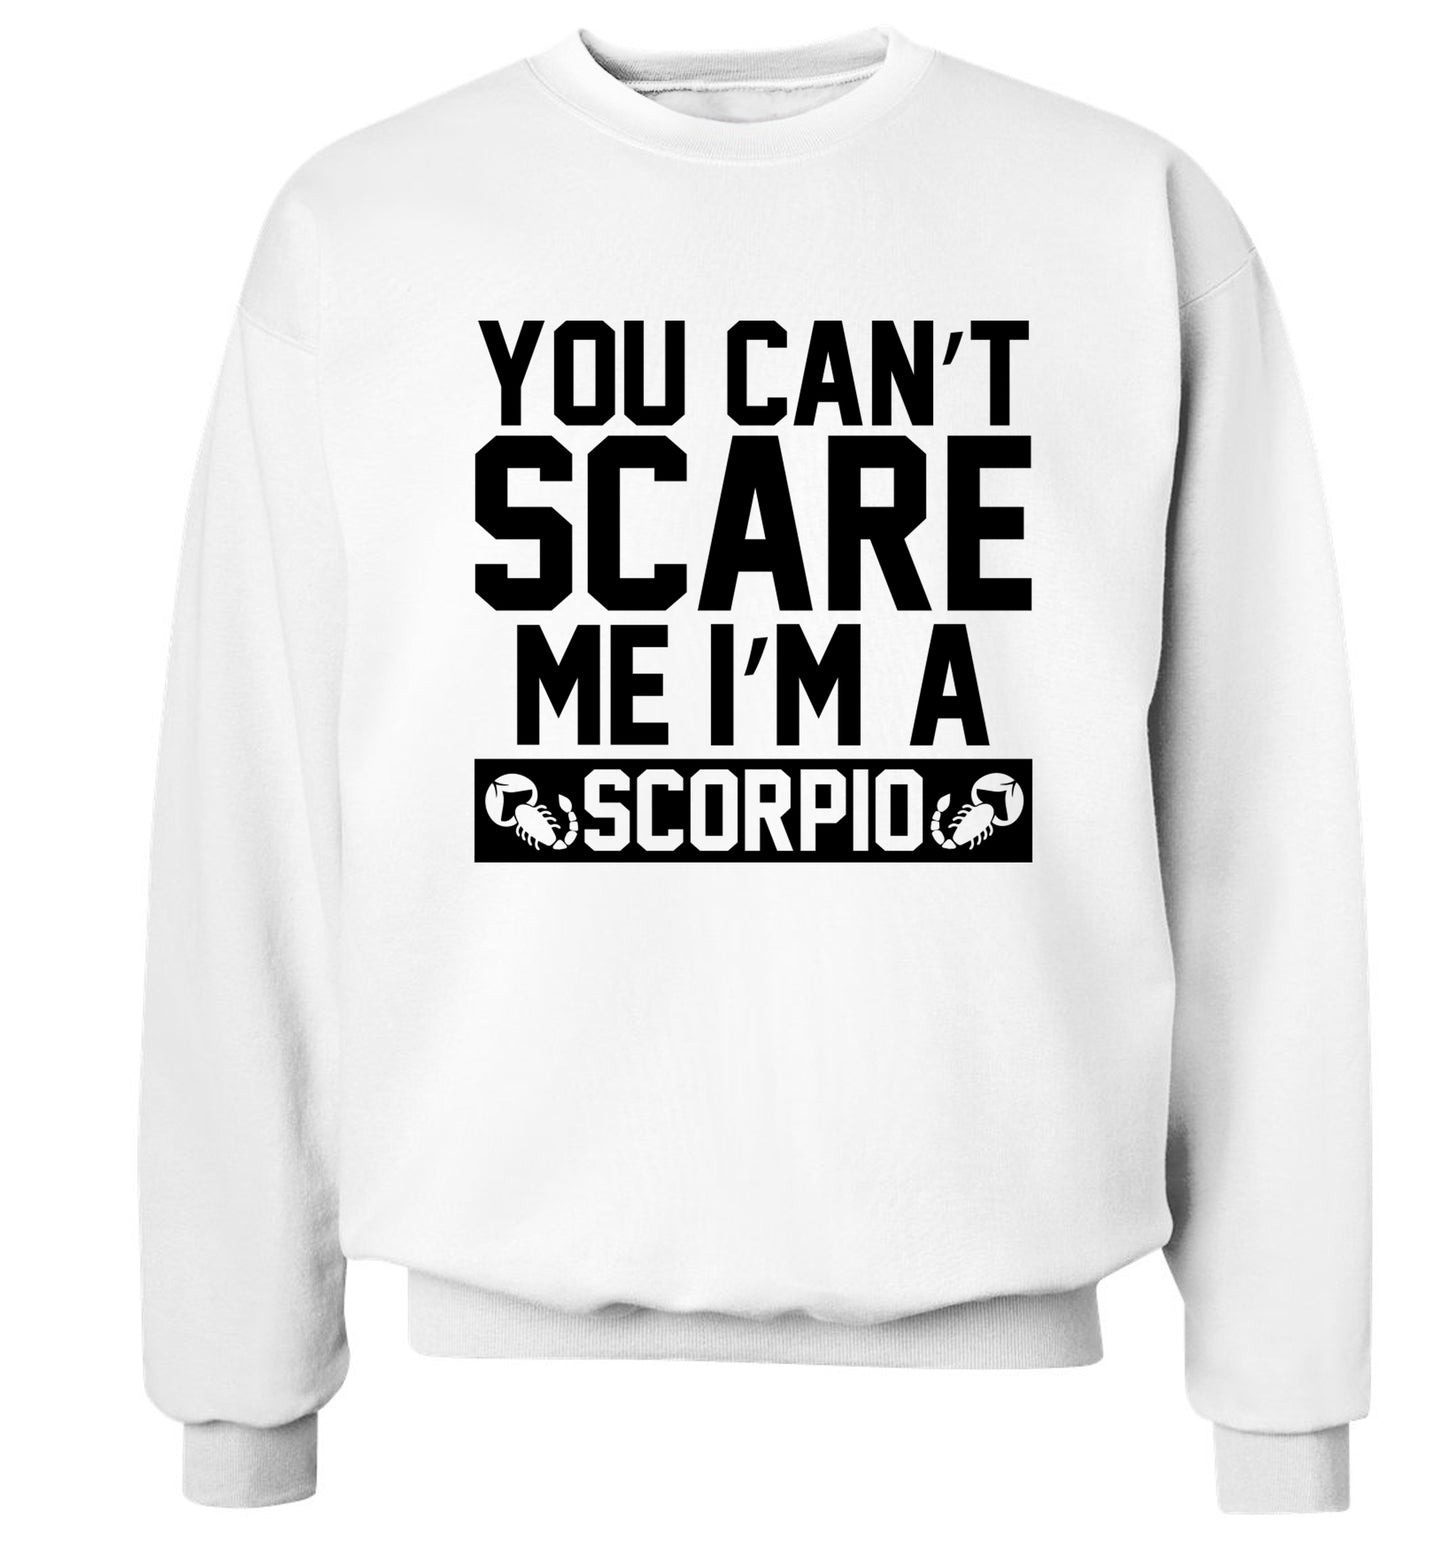 You can't scare me I'm a scorpio Adult's unisex white Sweater 2XL